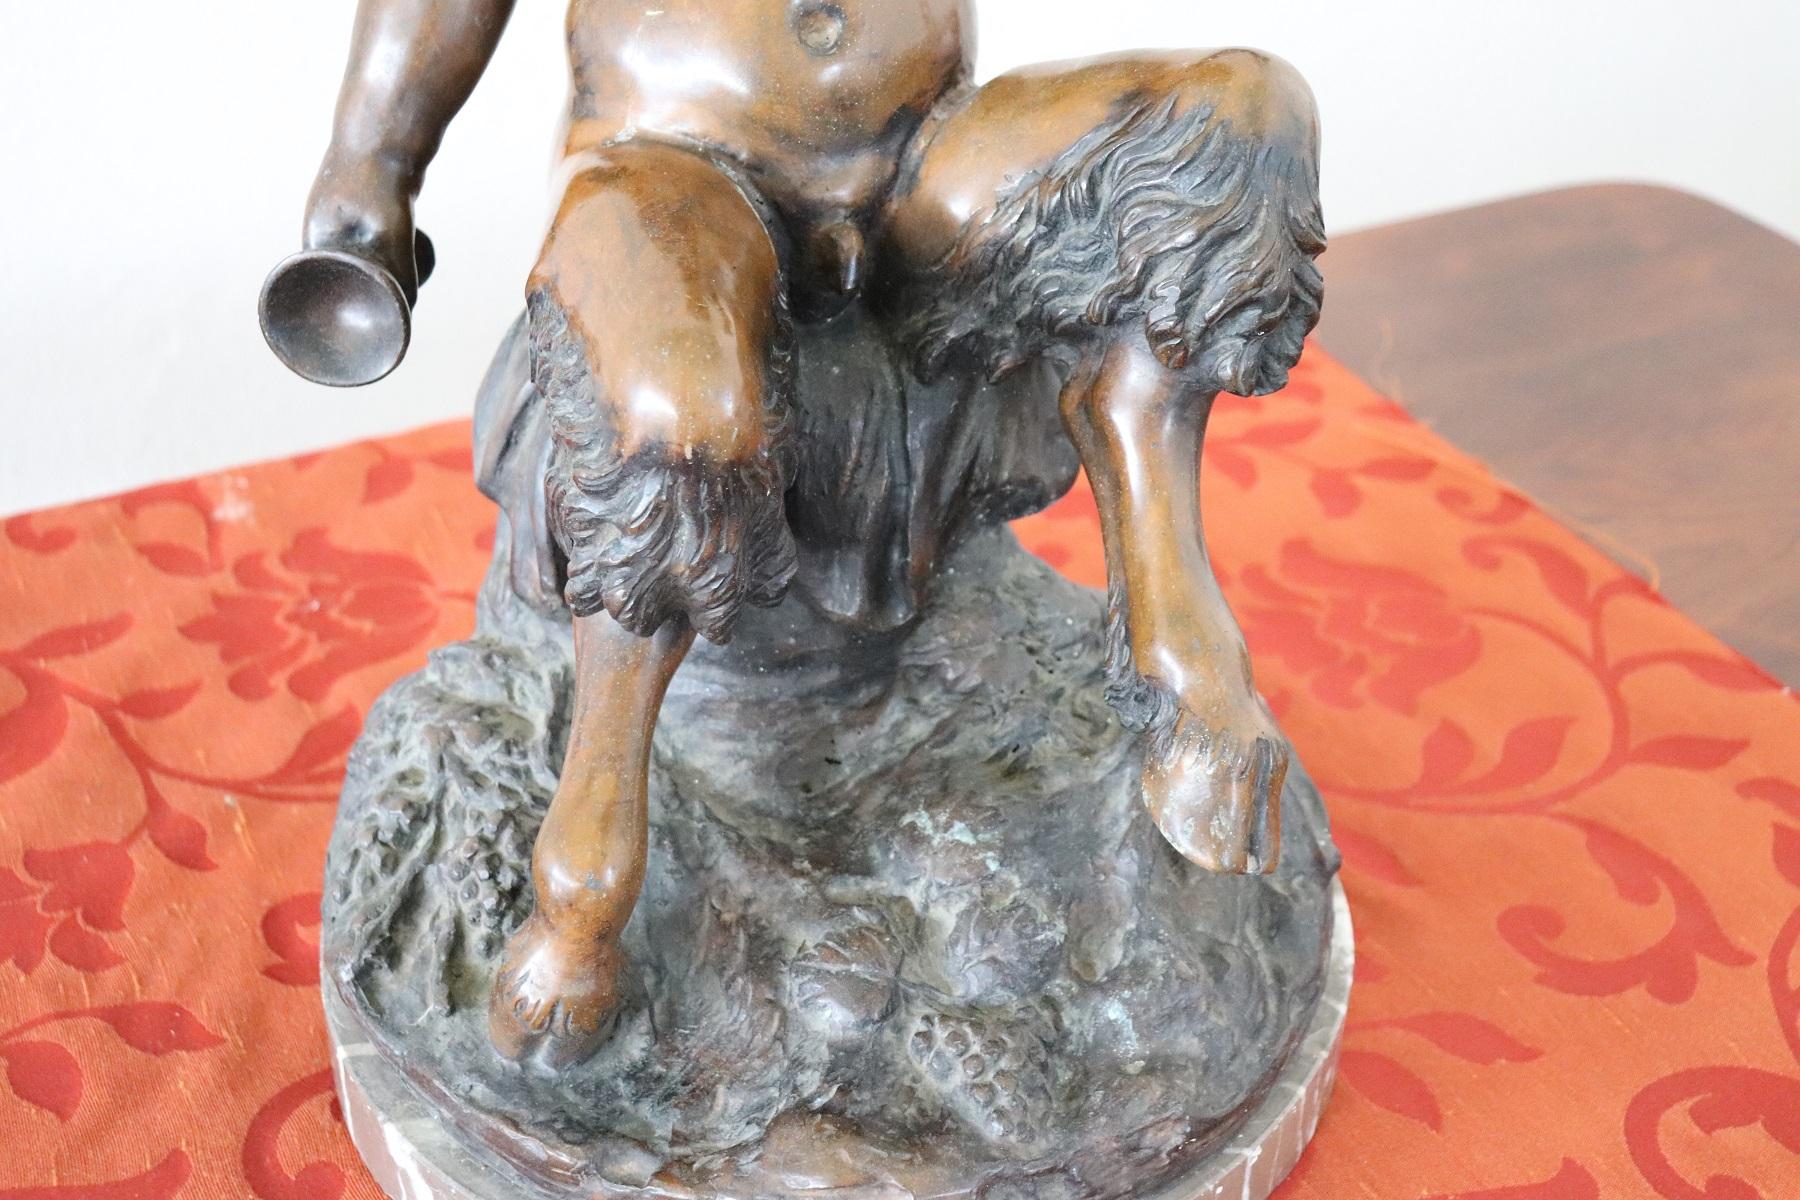 Rare antique bronze sculpture. The sculpture signed Vincenzo Cinque (1852-1929) important Italian sculptor of the city of Naples. This sculpture represents a faun. The Faun is a nature deity belonging to Roman mythology. More precisely he is the